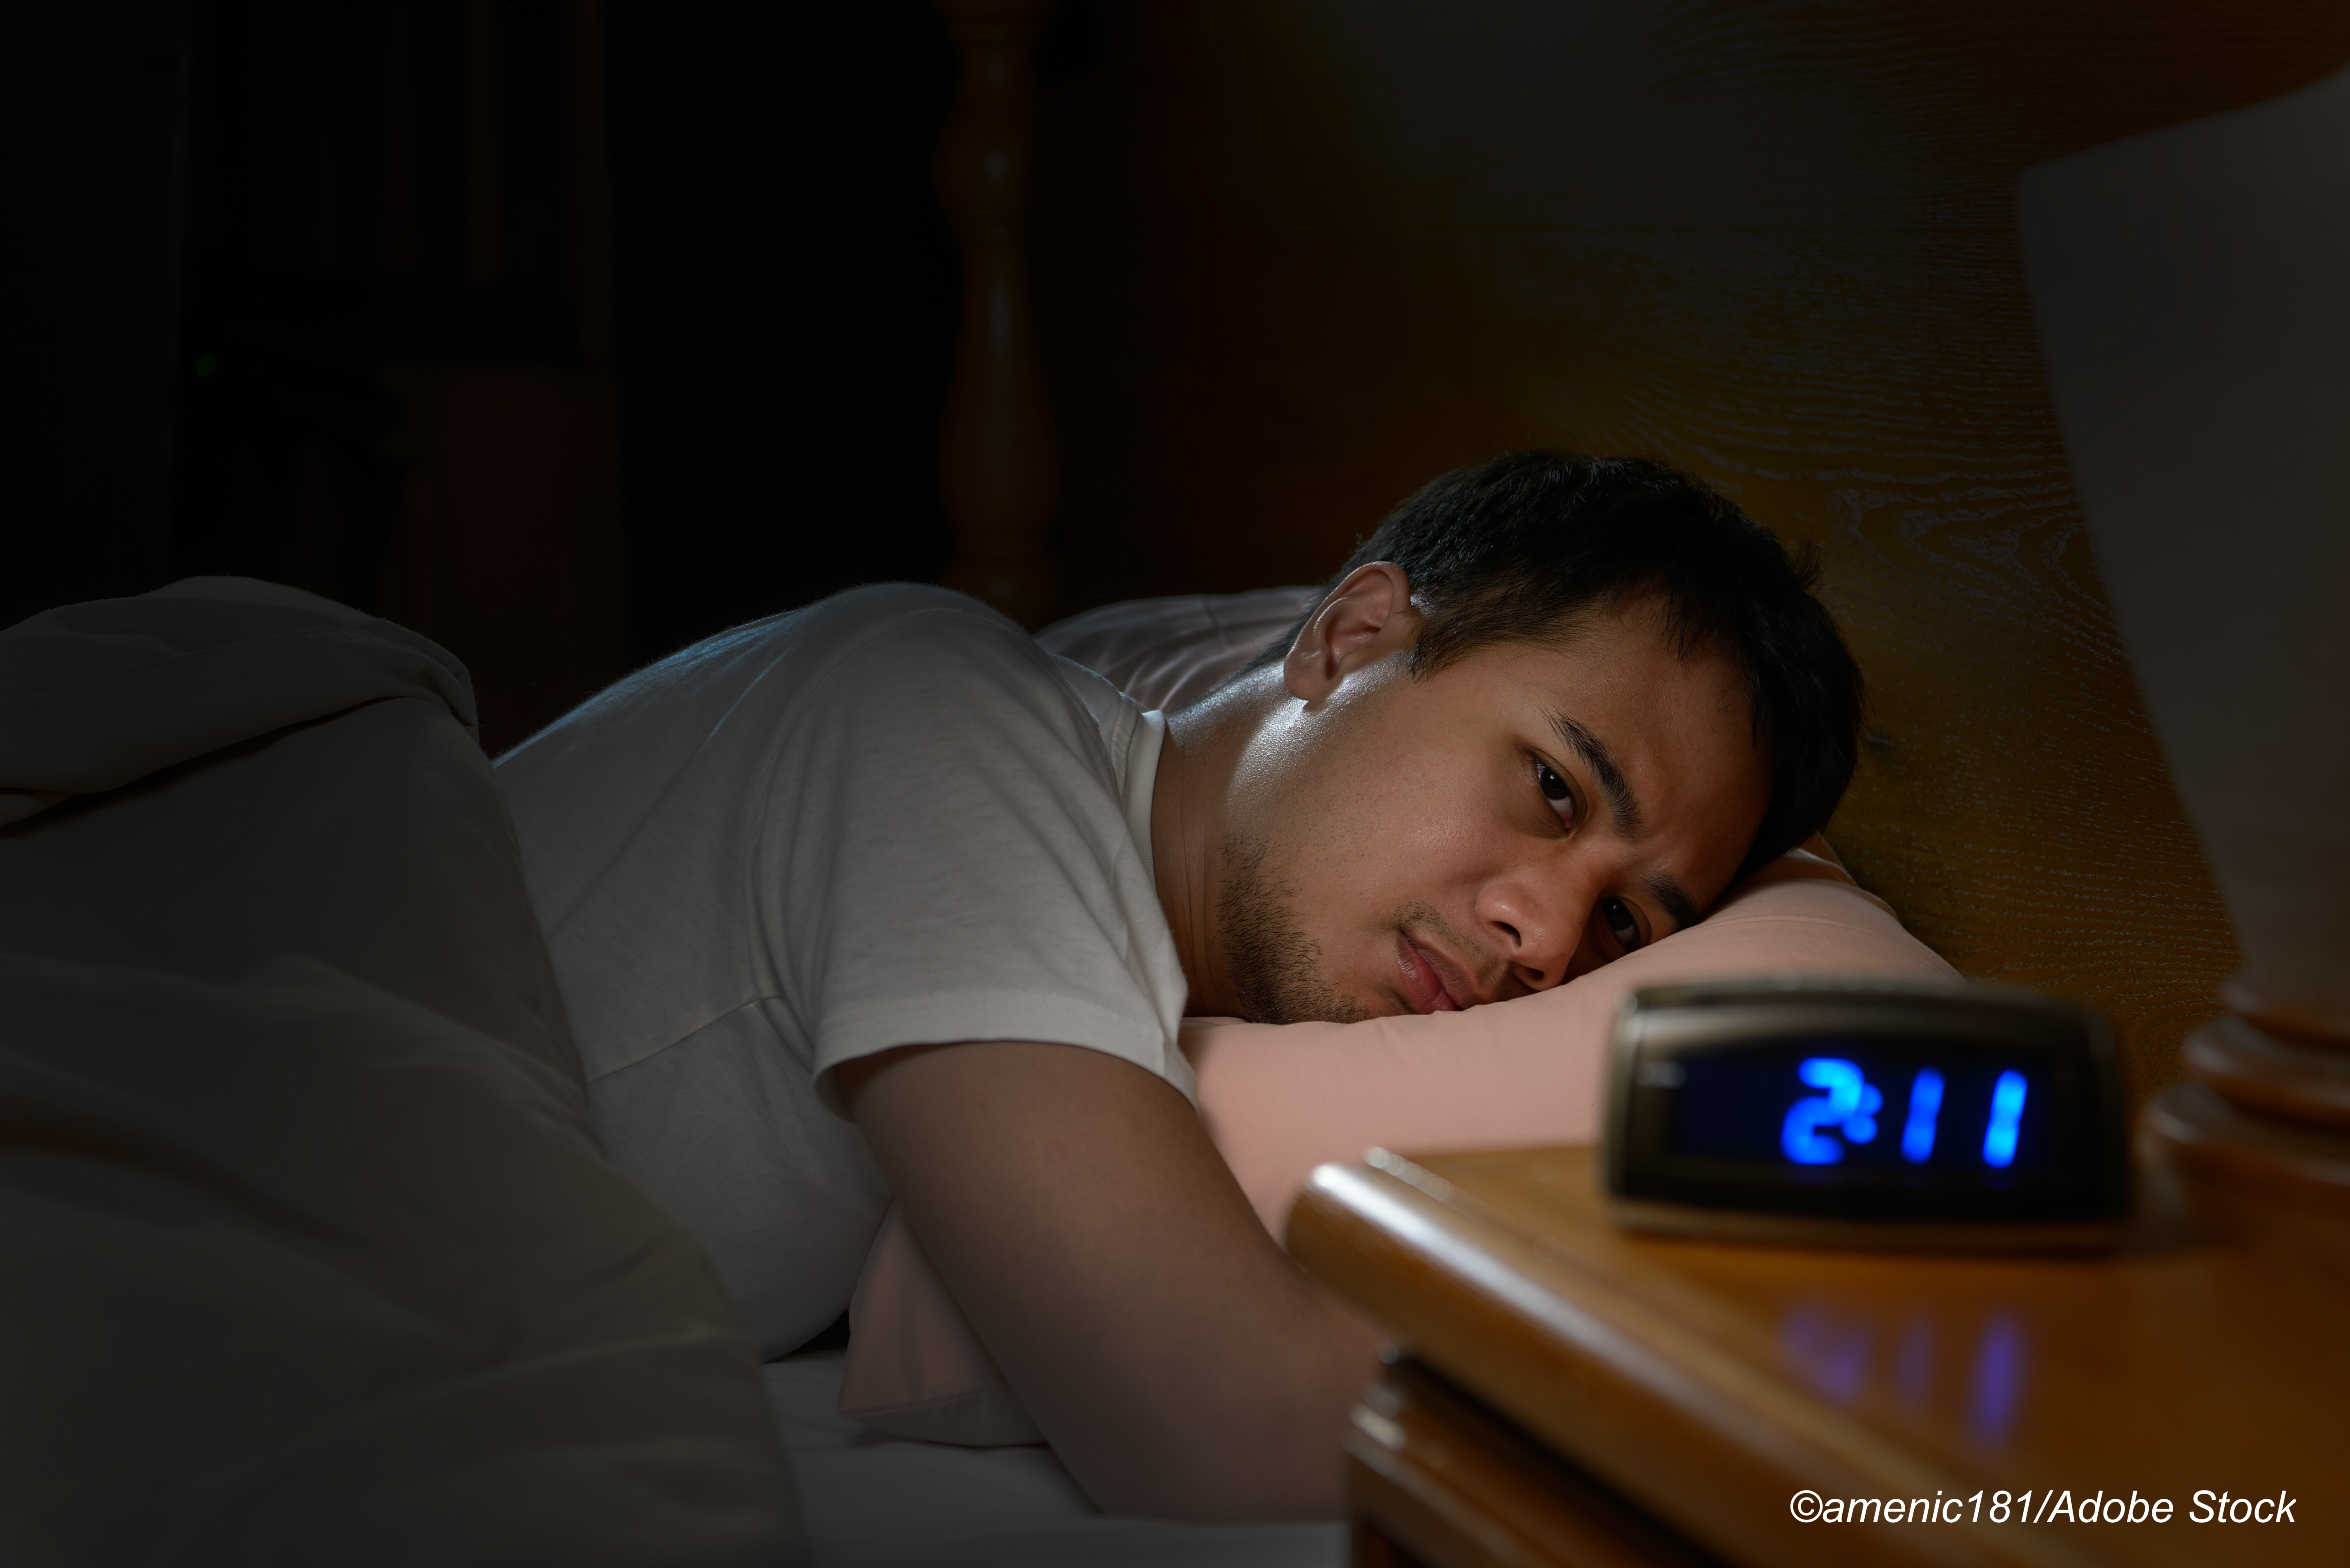 Daridorexant Improves Sleep Outcomes for Adults With Insomnia